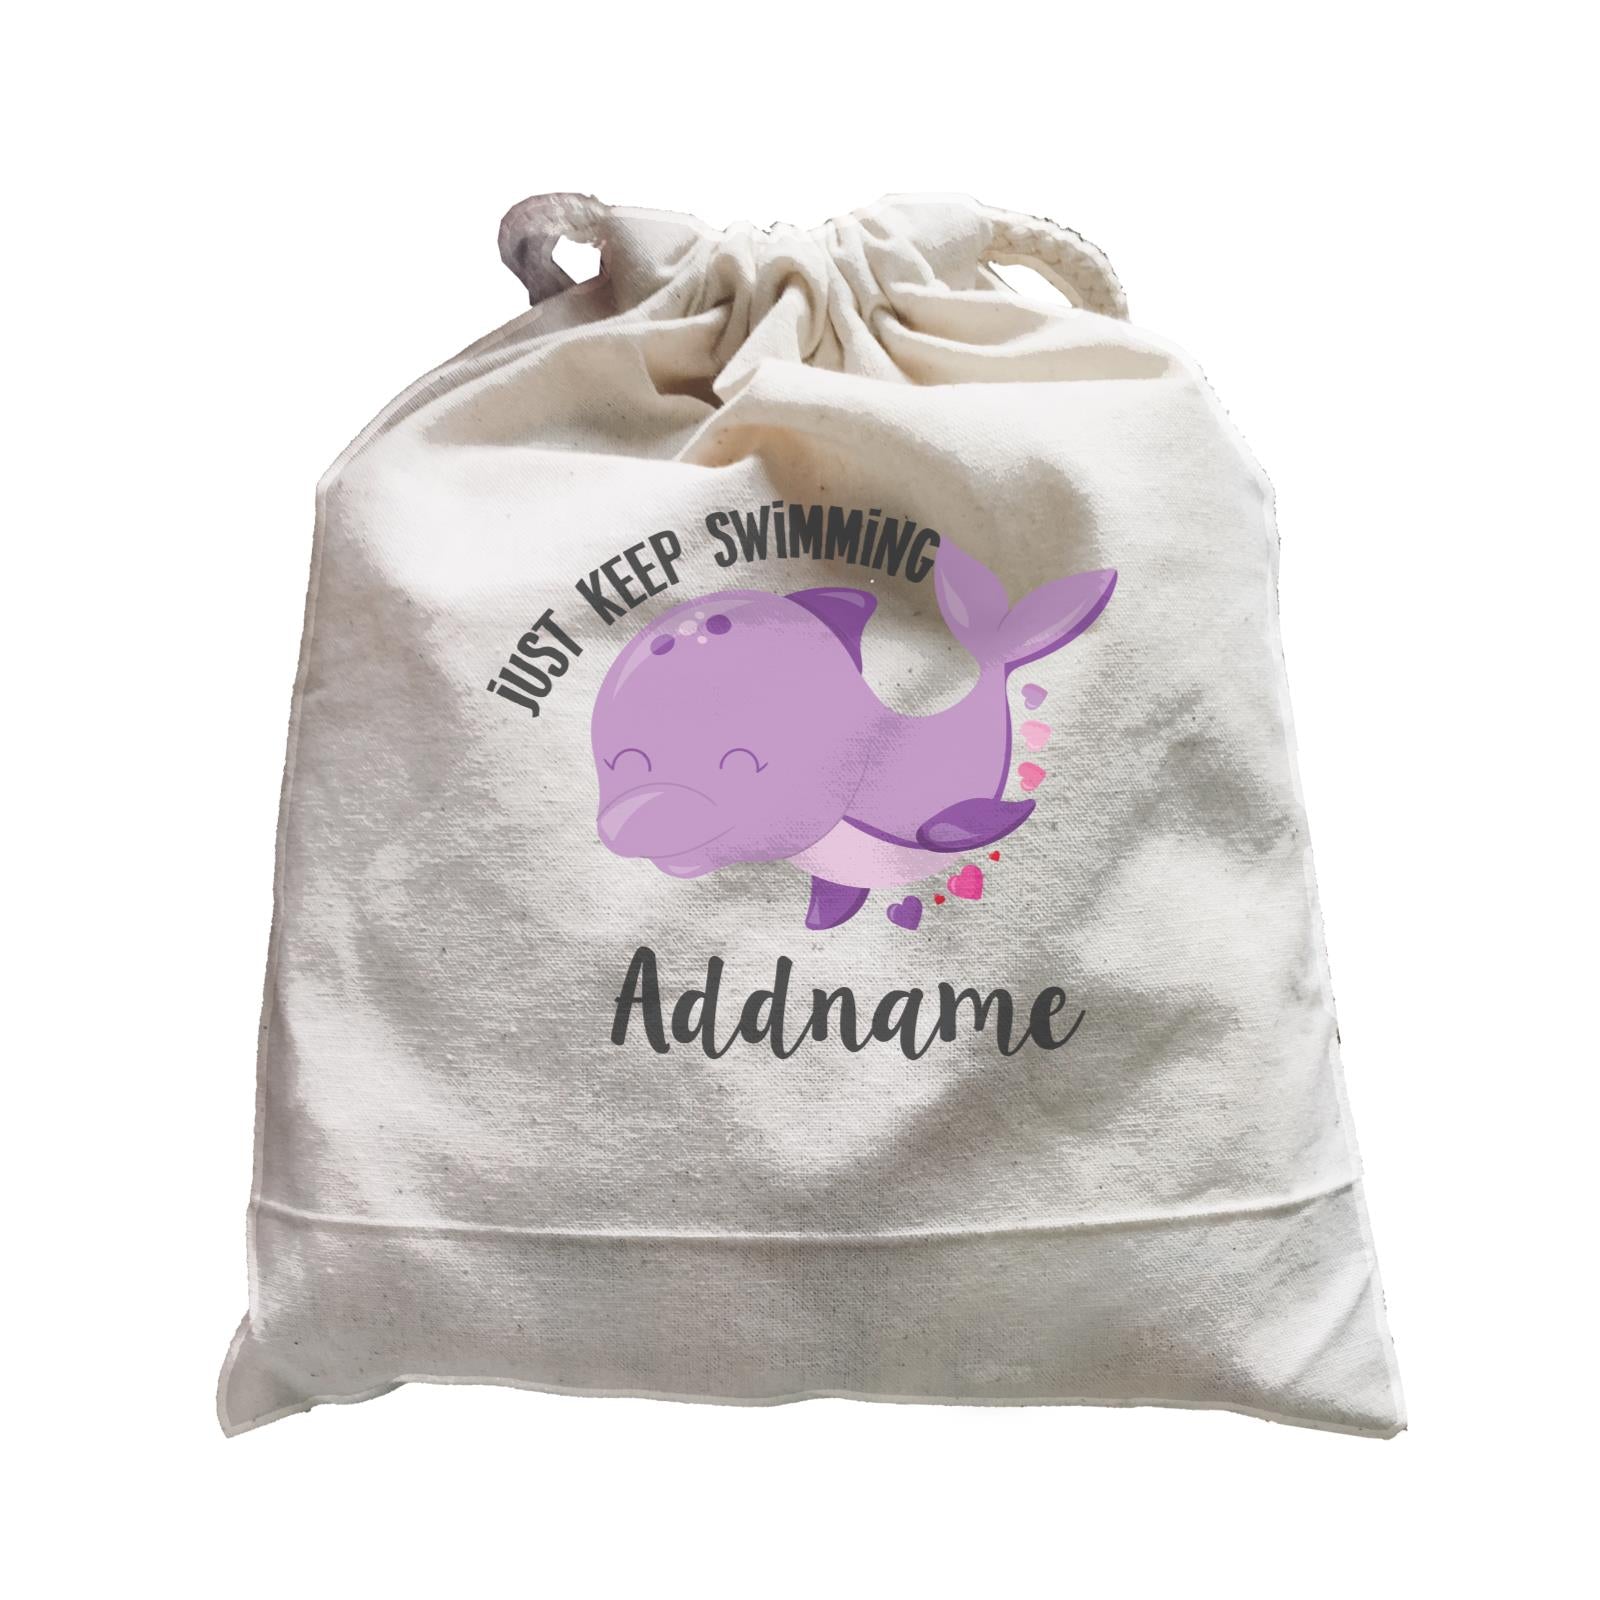 Cute Sea Animals Dolphin Just Keep Swimming Addname Satchel